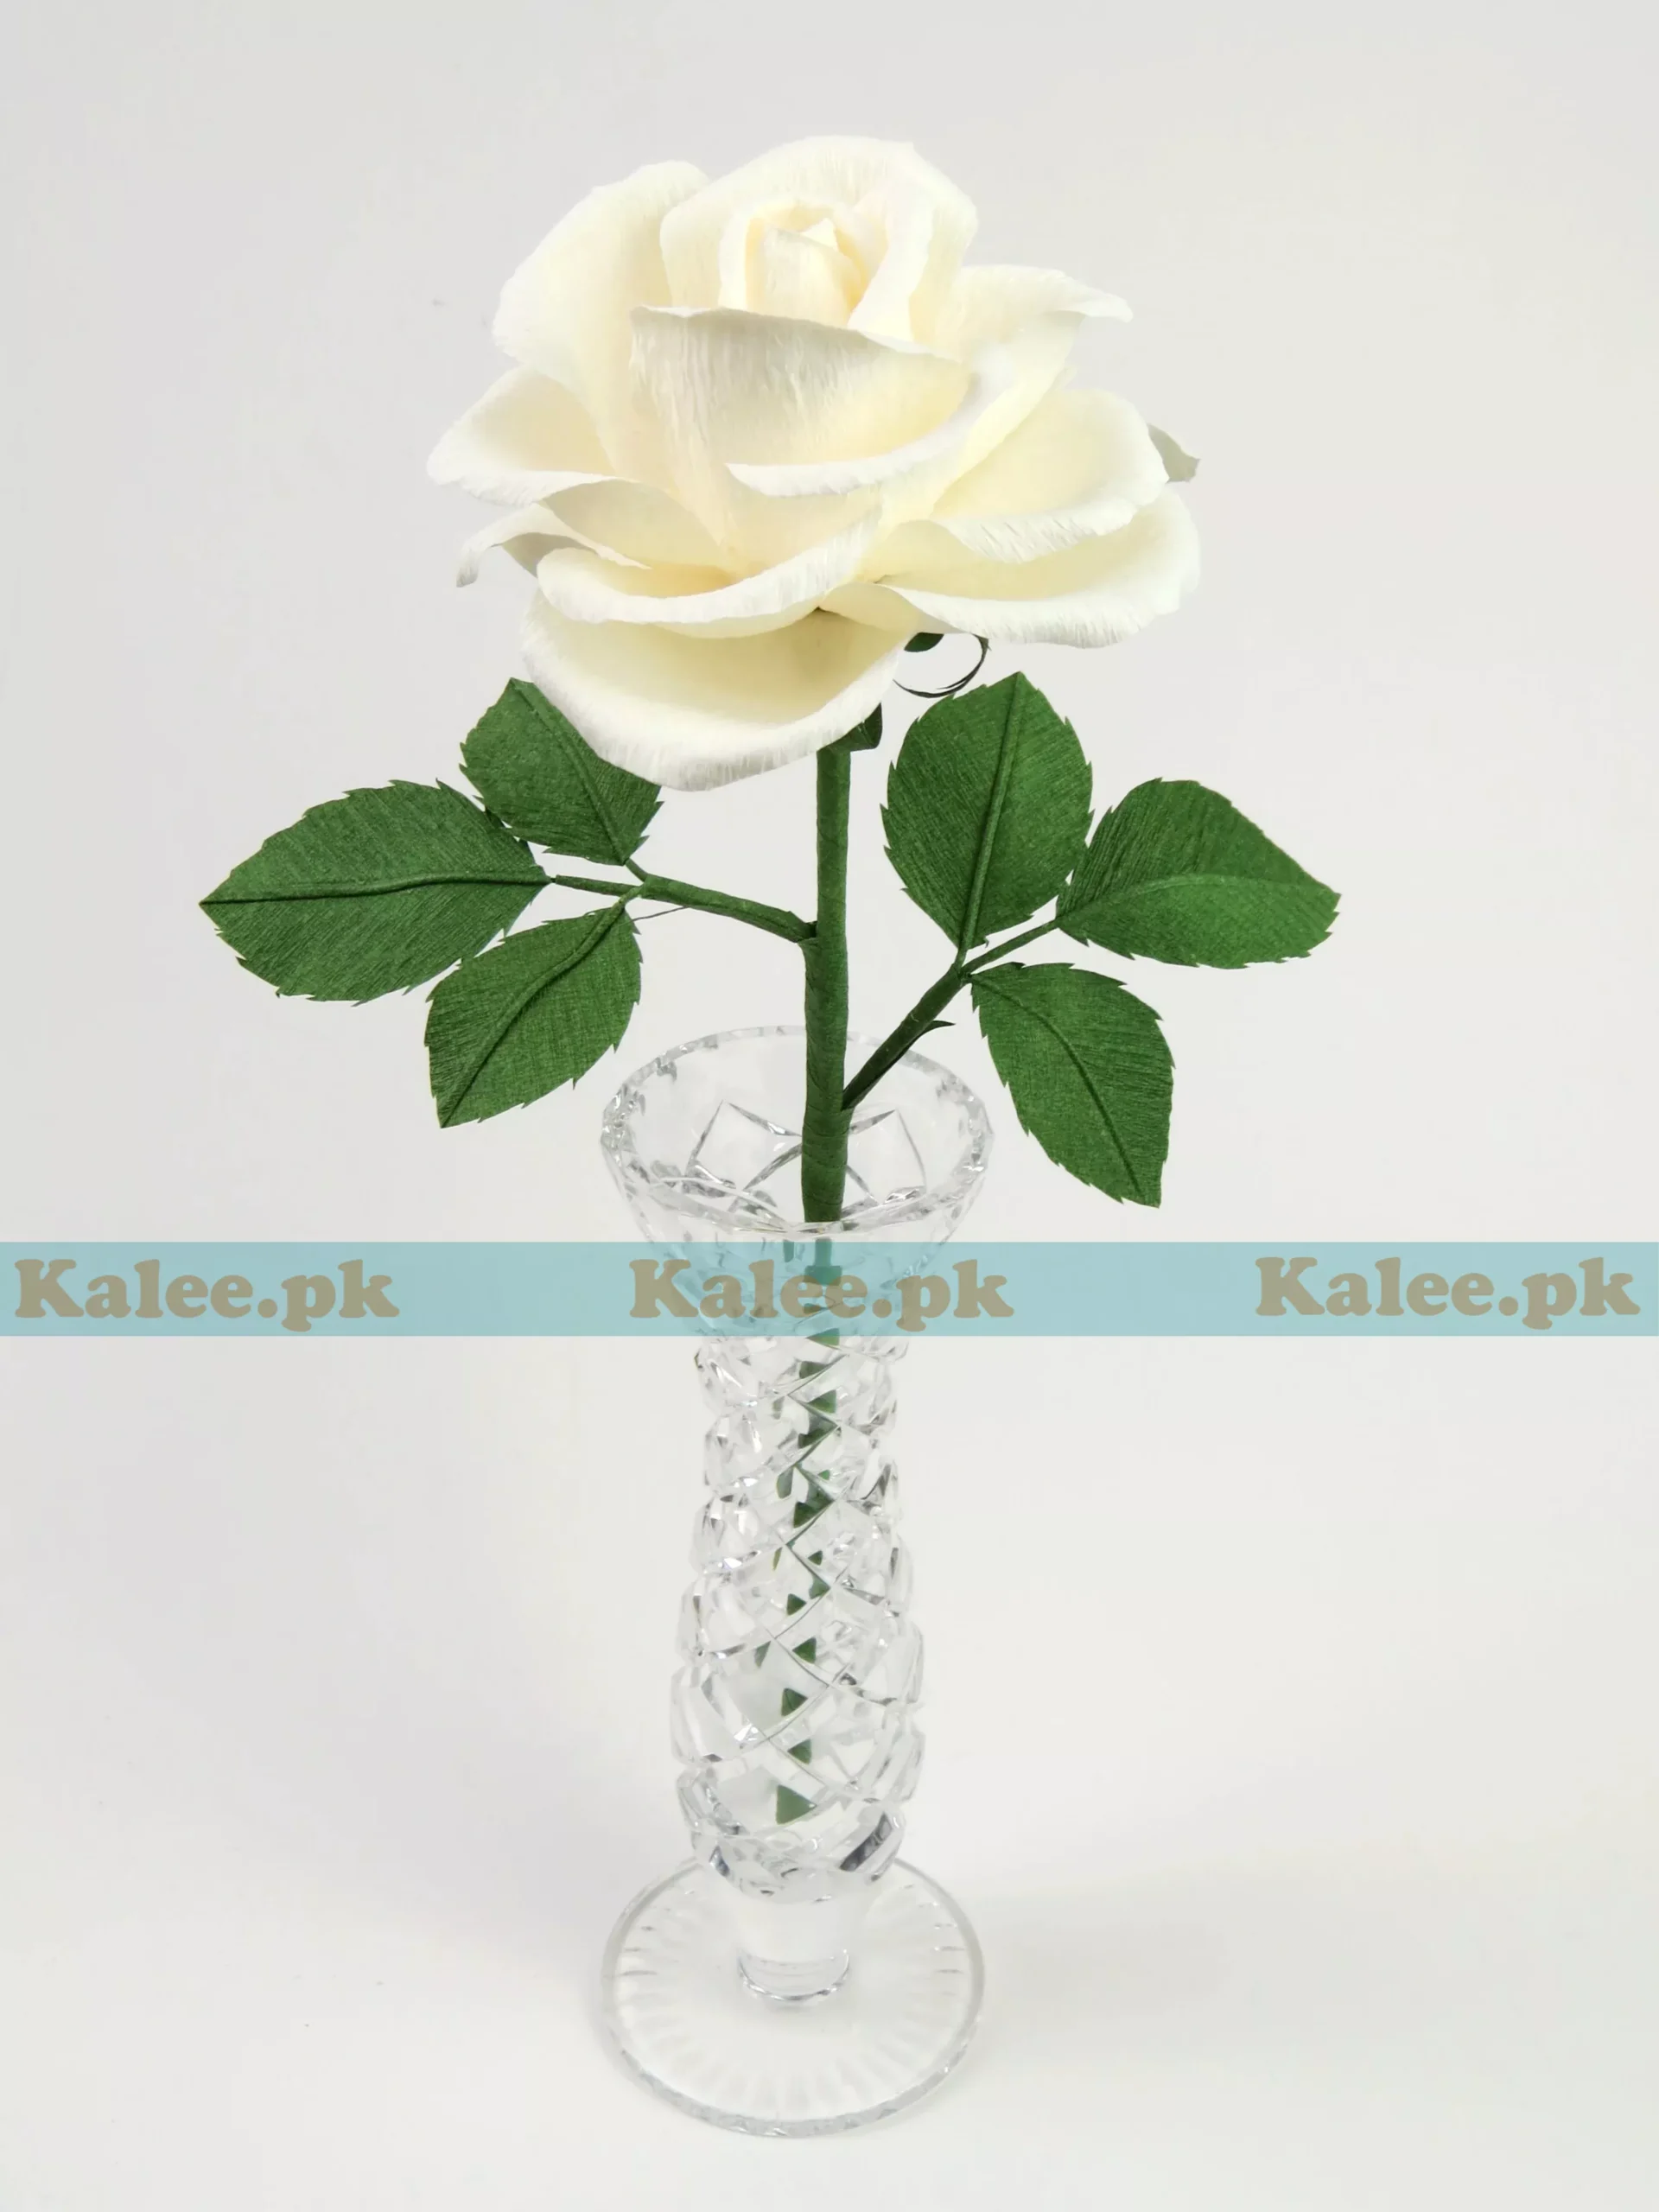 A pristine white rose bloom against a soft background.